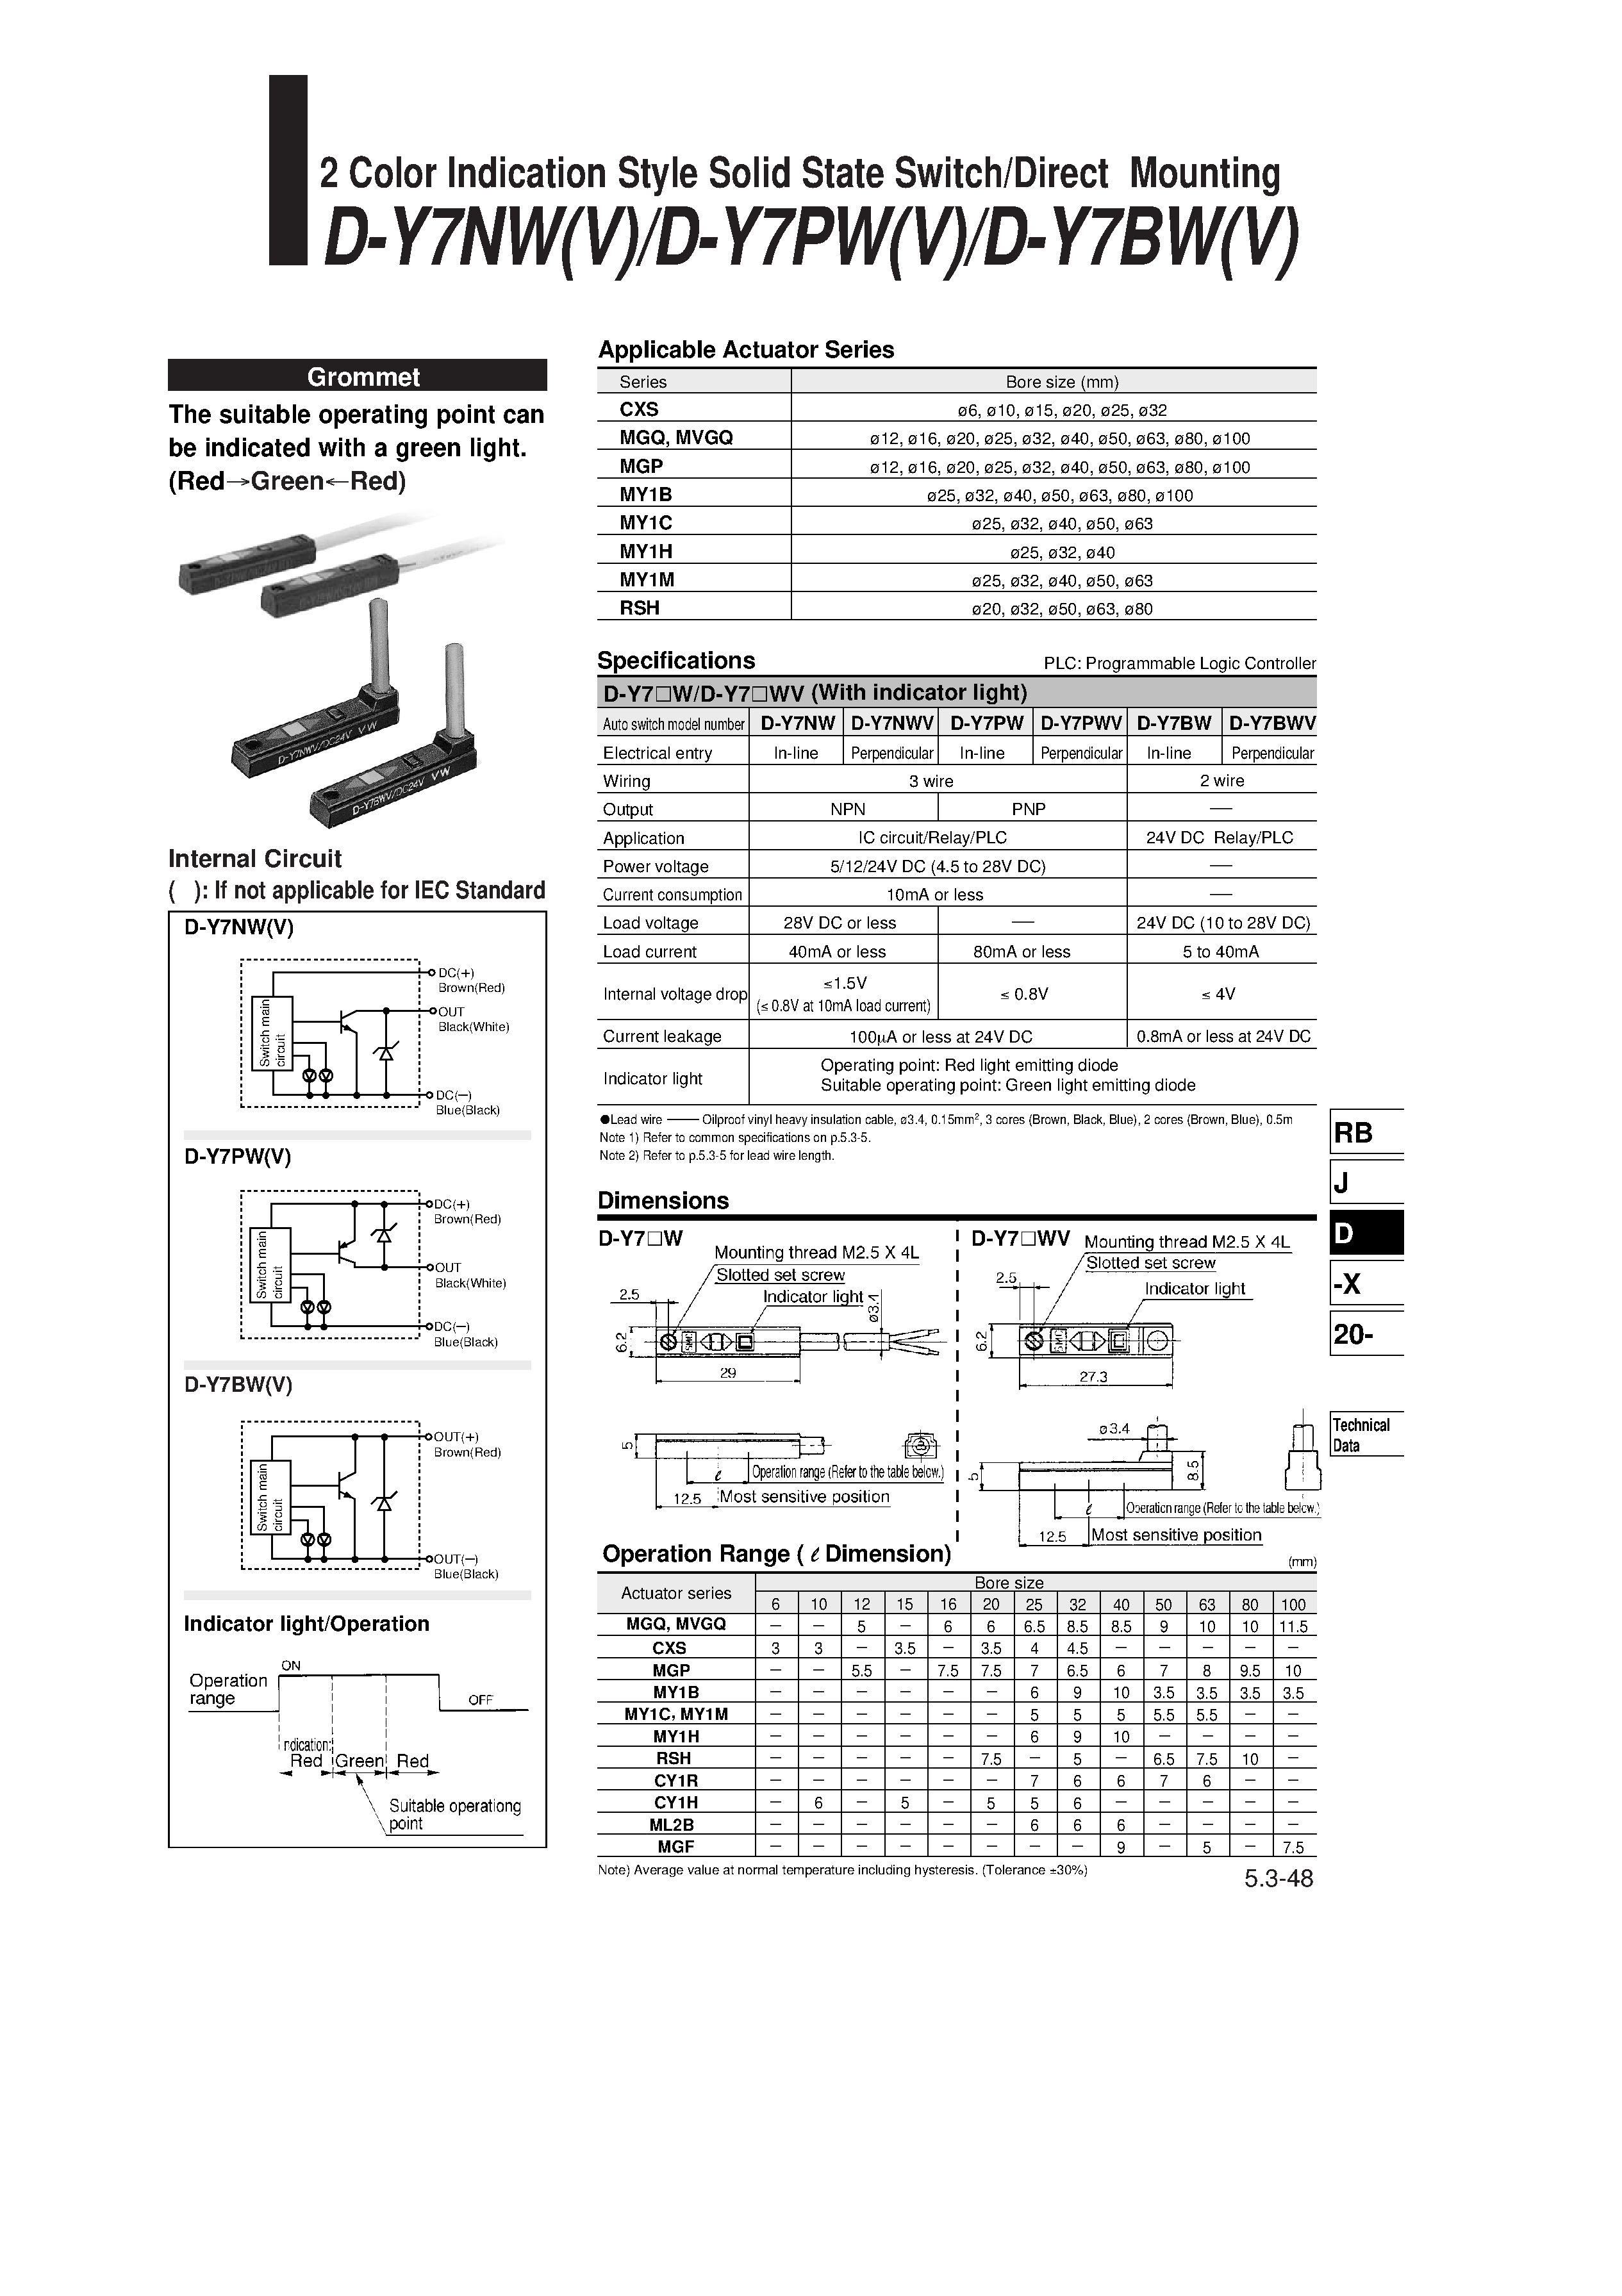 Datasheet D-Y7PW - (D-Y7xx) 2 Color Indication Style Solid State Switch / Direct Mounting page 1